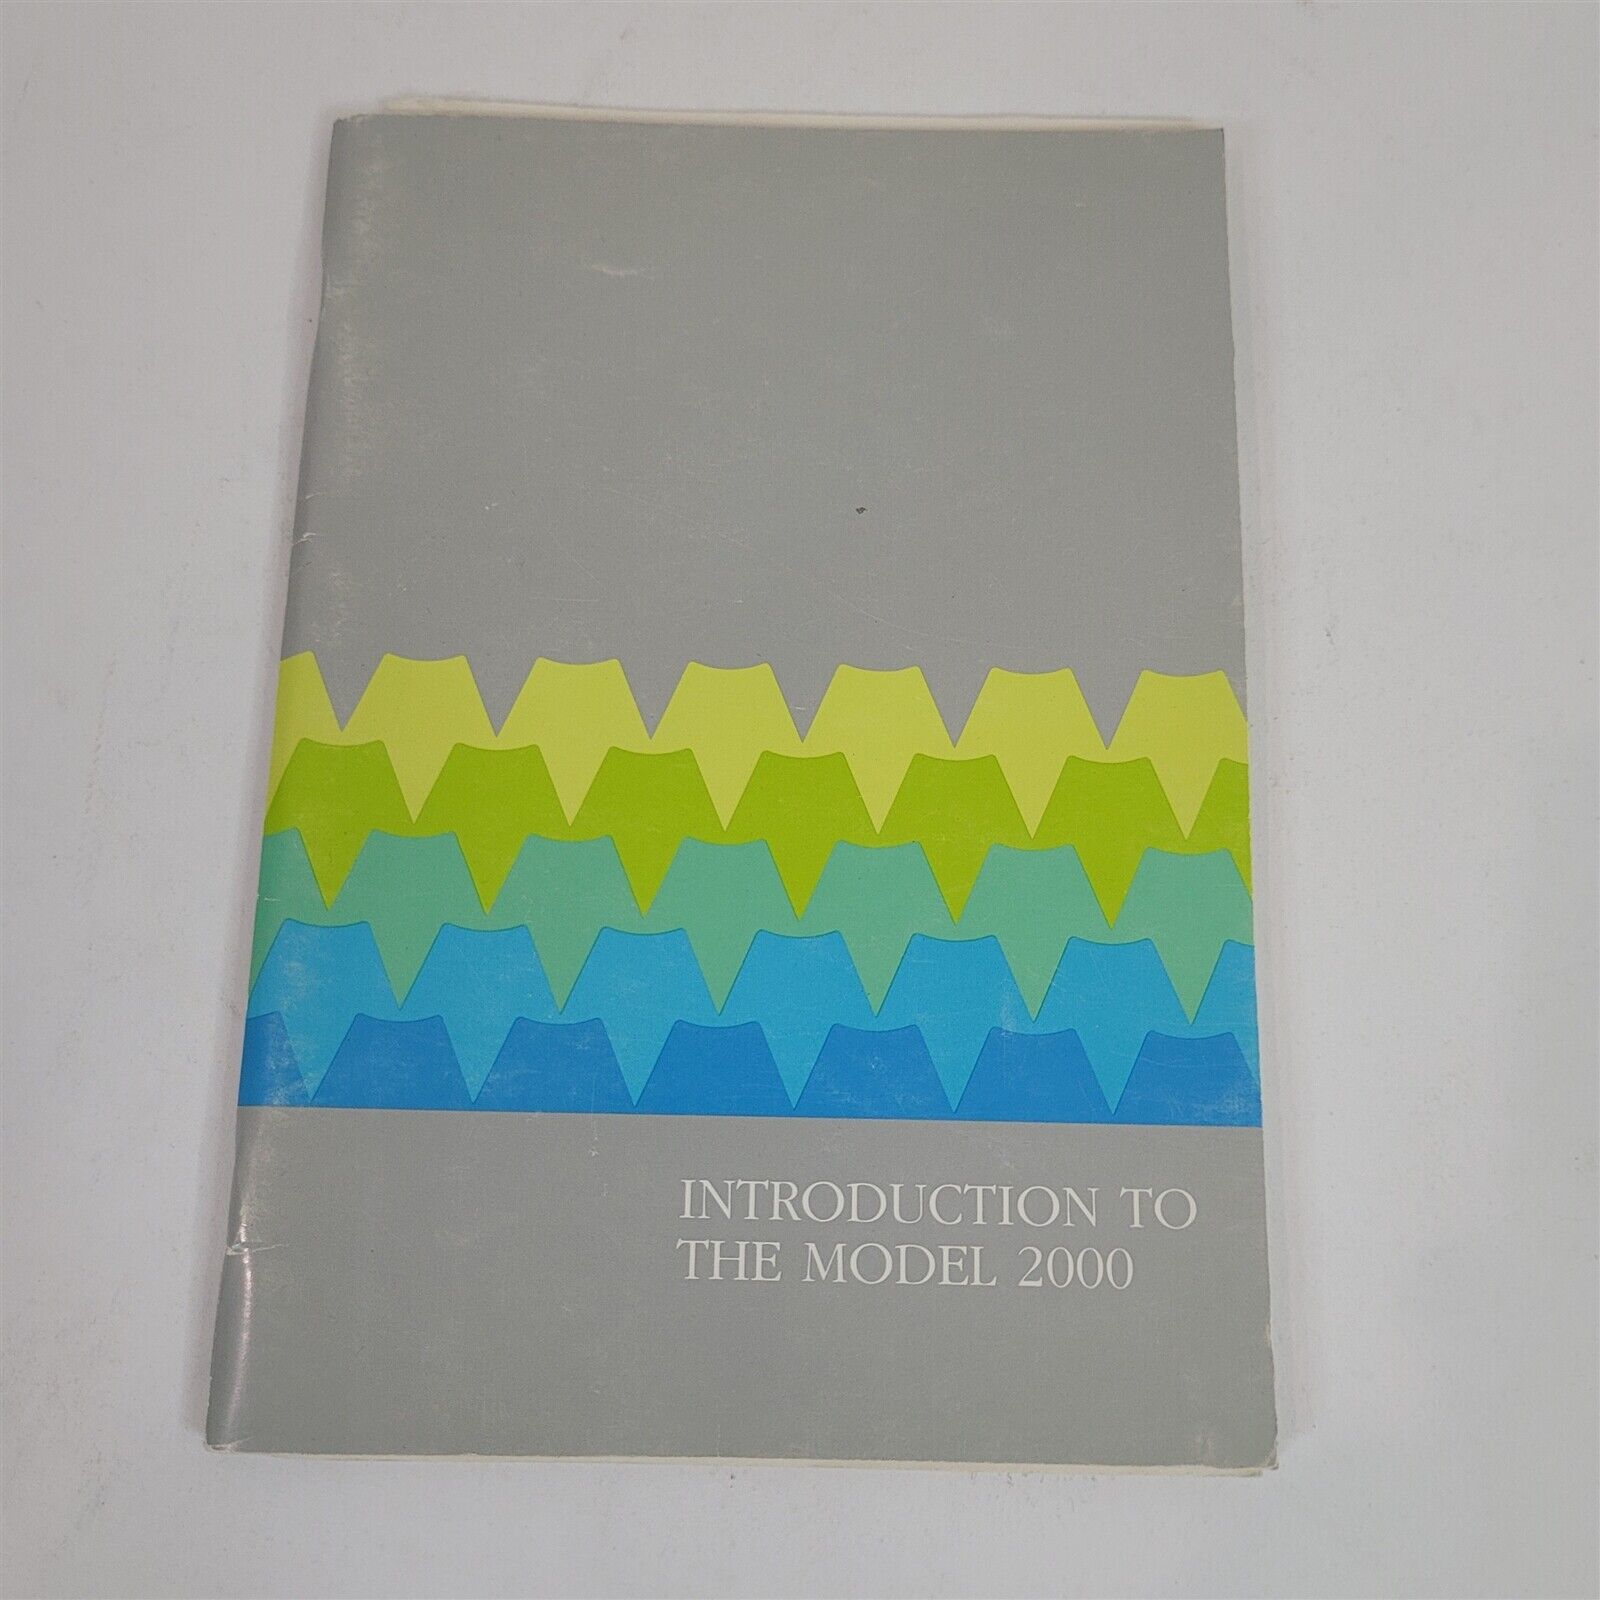 Vintage 1983 Original Introduction to the Tandy Model 2000 Owner's manual